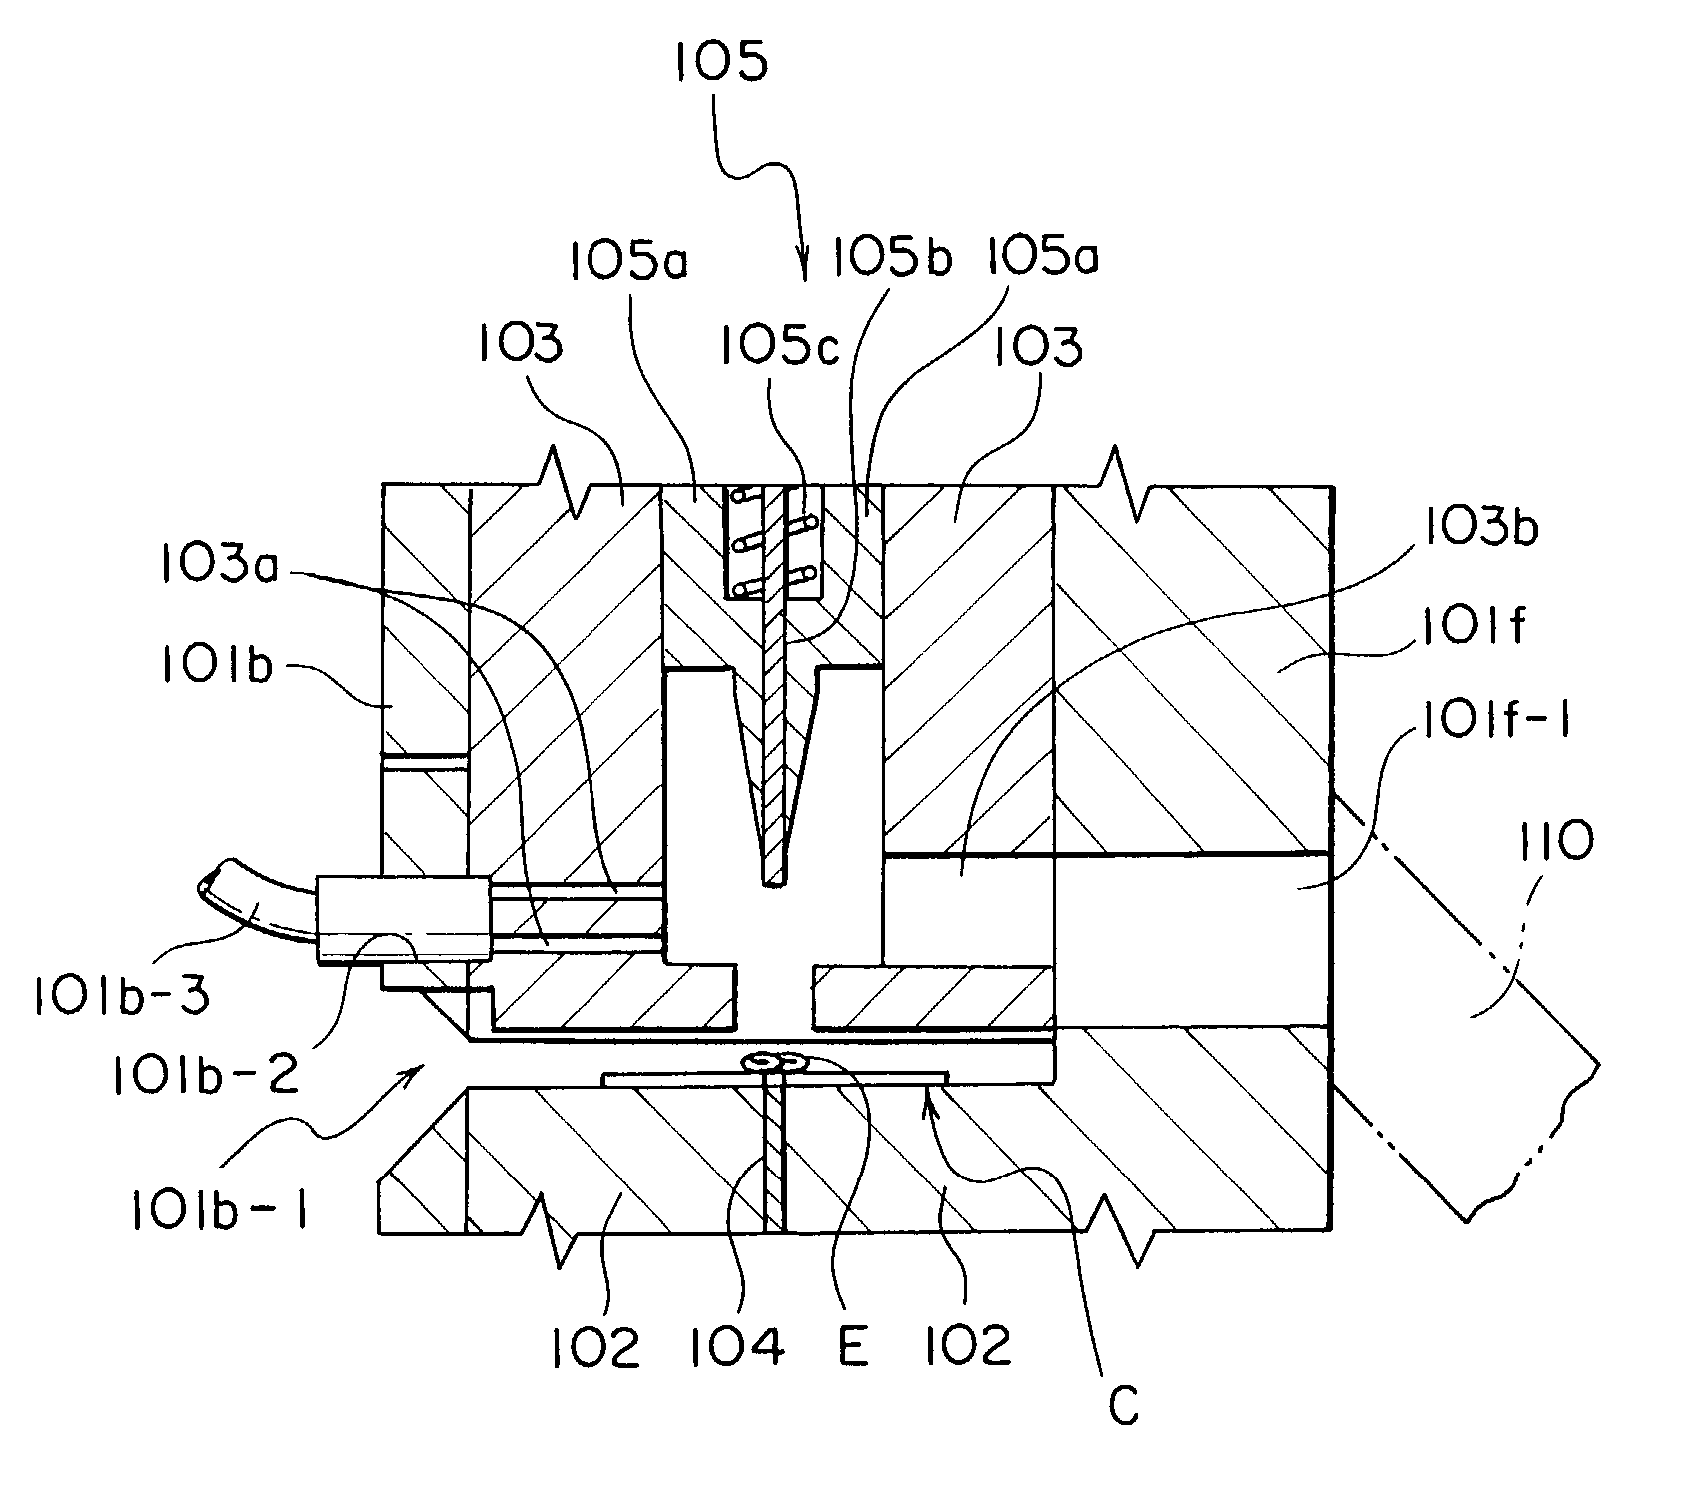 Space forming apparatus for a slide fastener chain